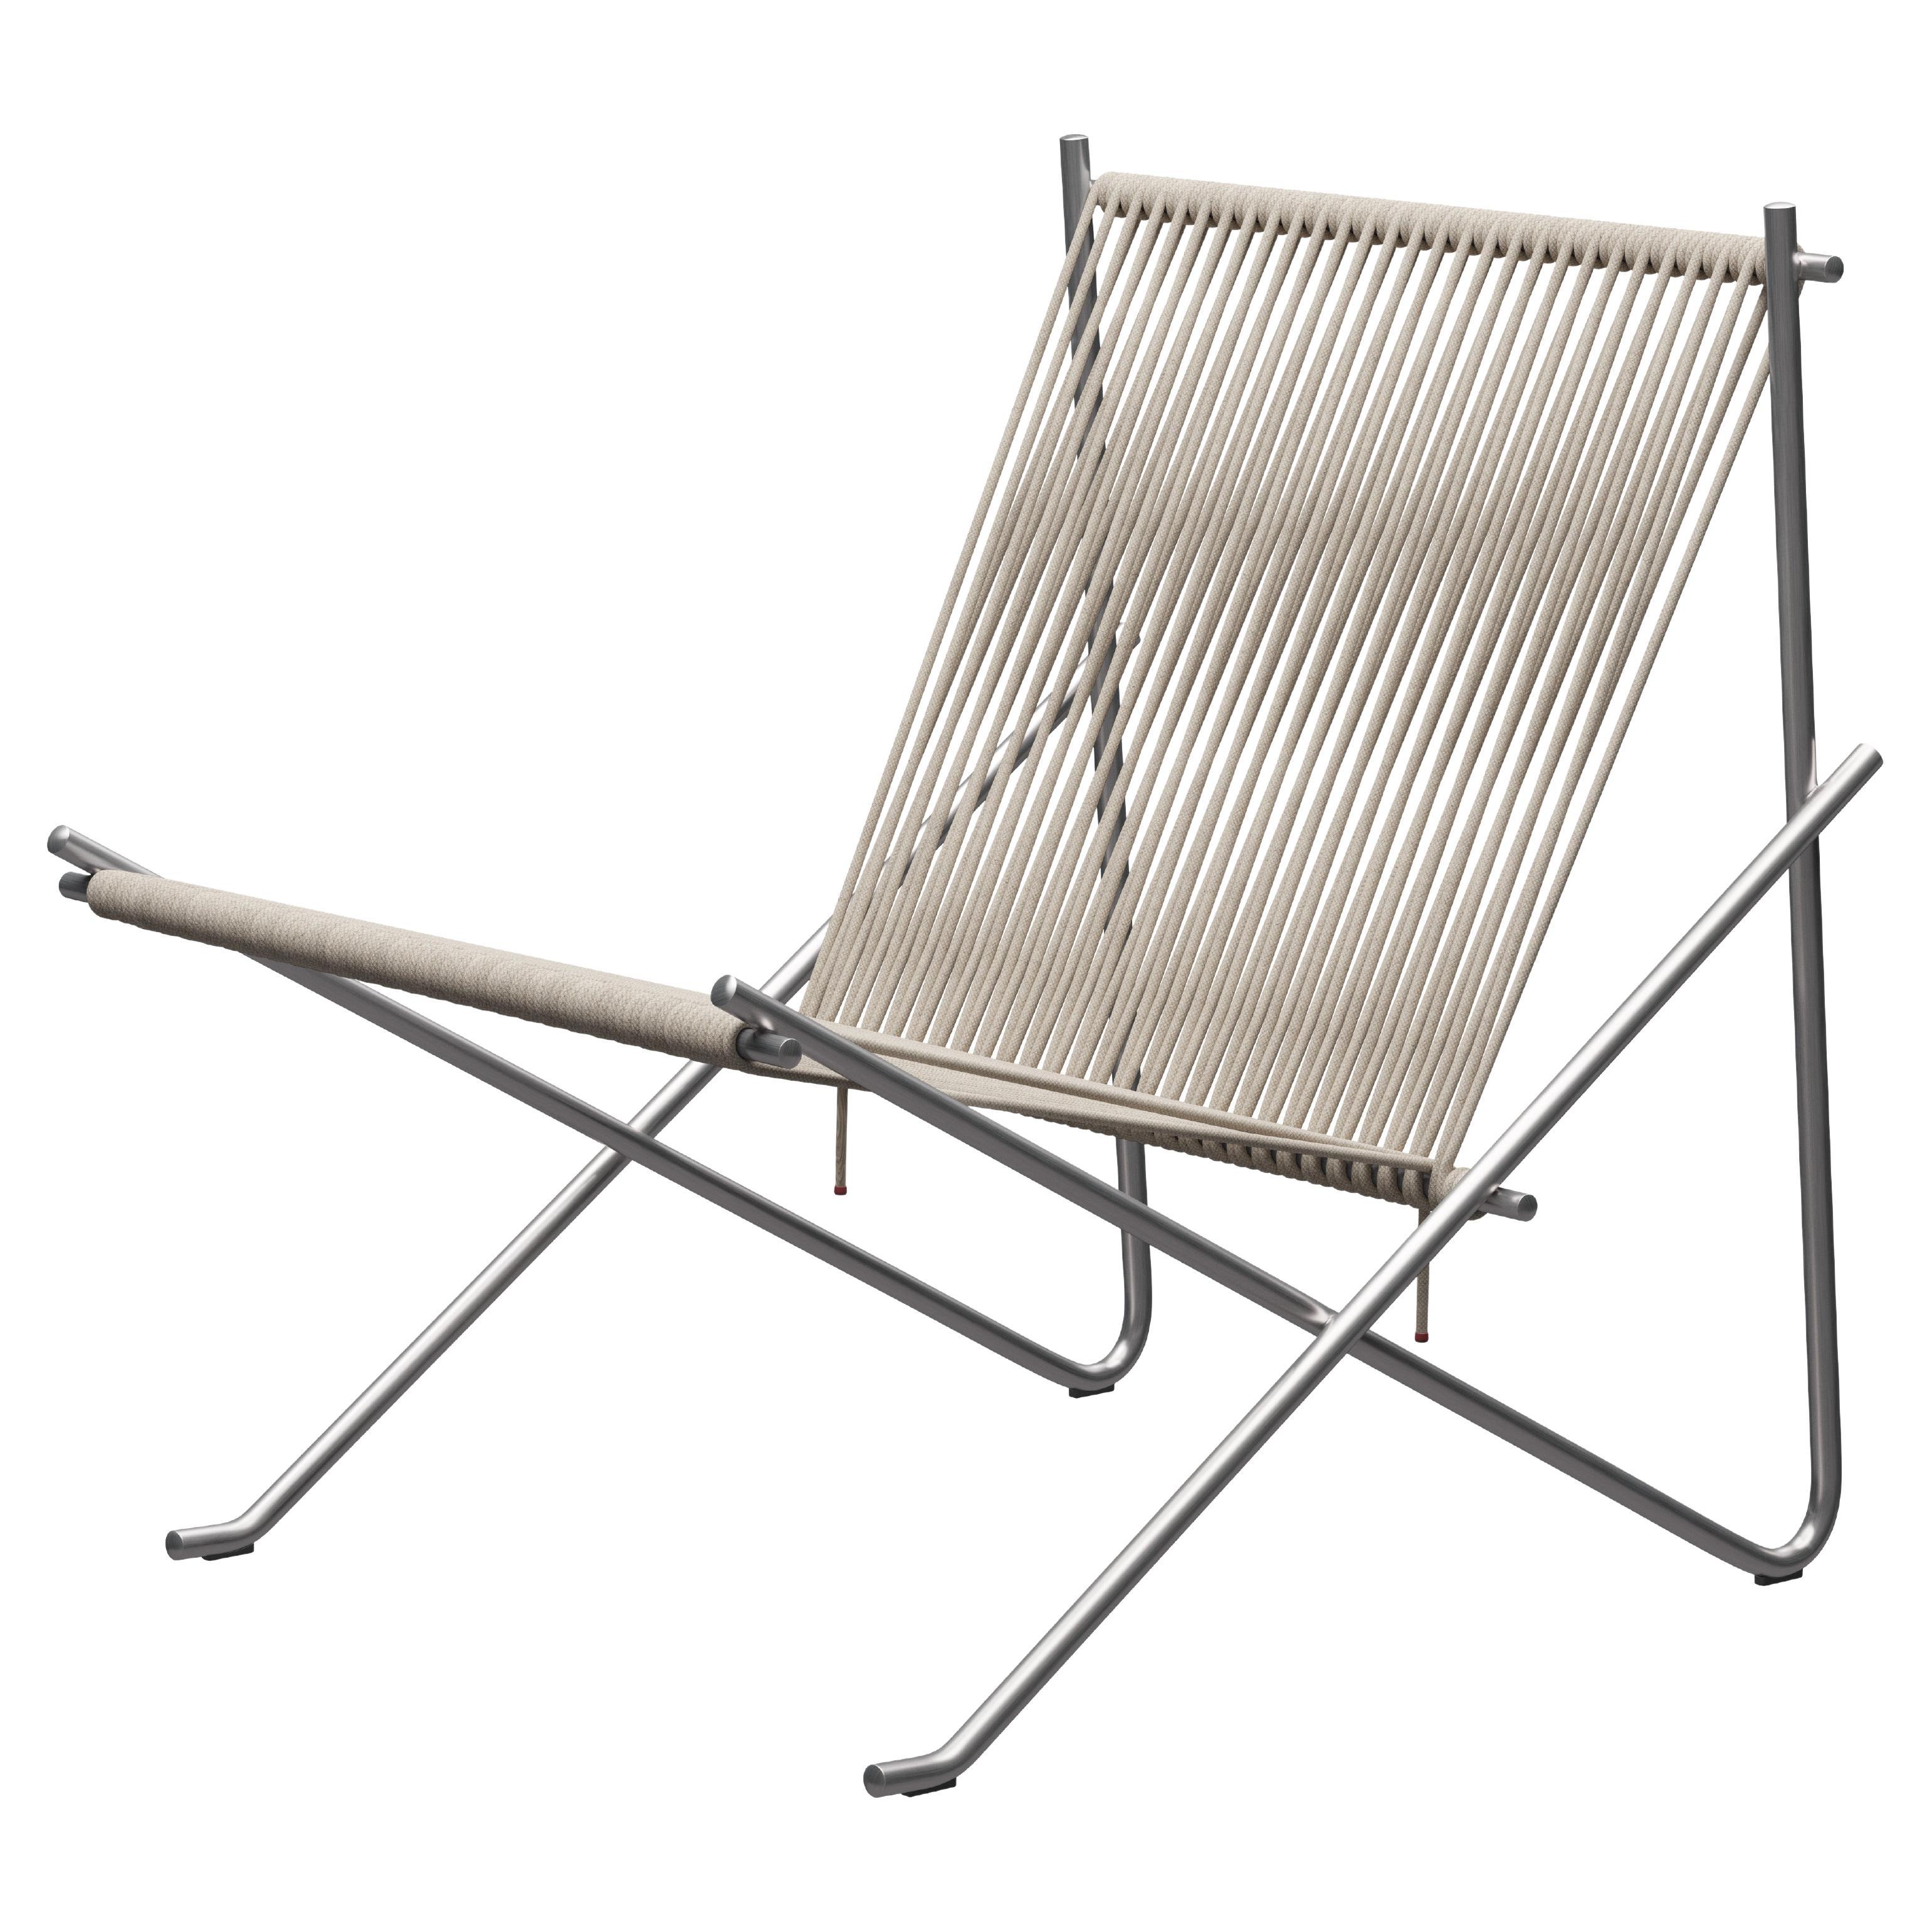 'PK4' Lounge Chair for Fritz Hansen in Natural Flag Halyard with Steel Frame